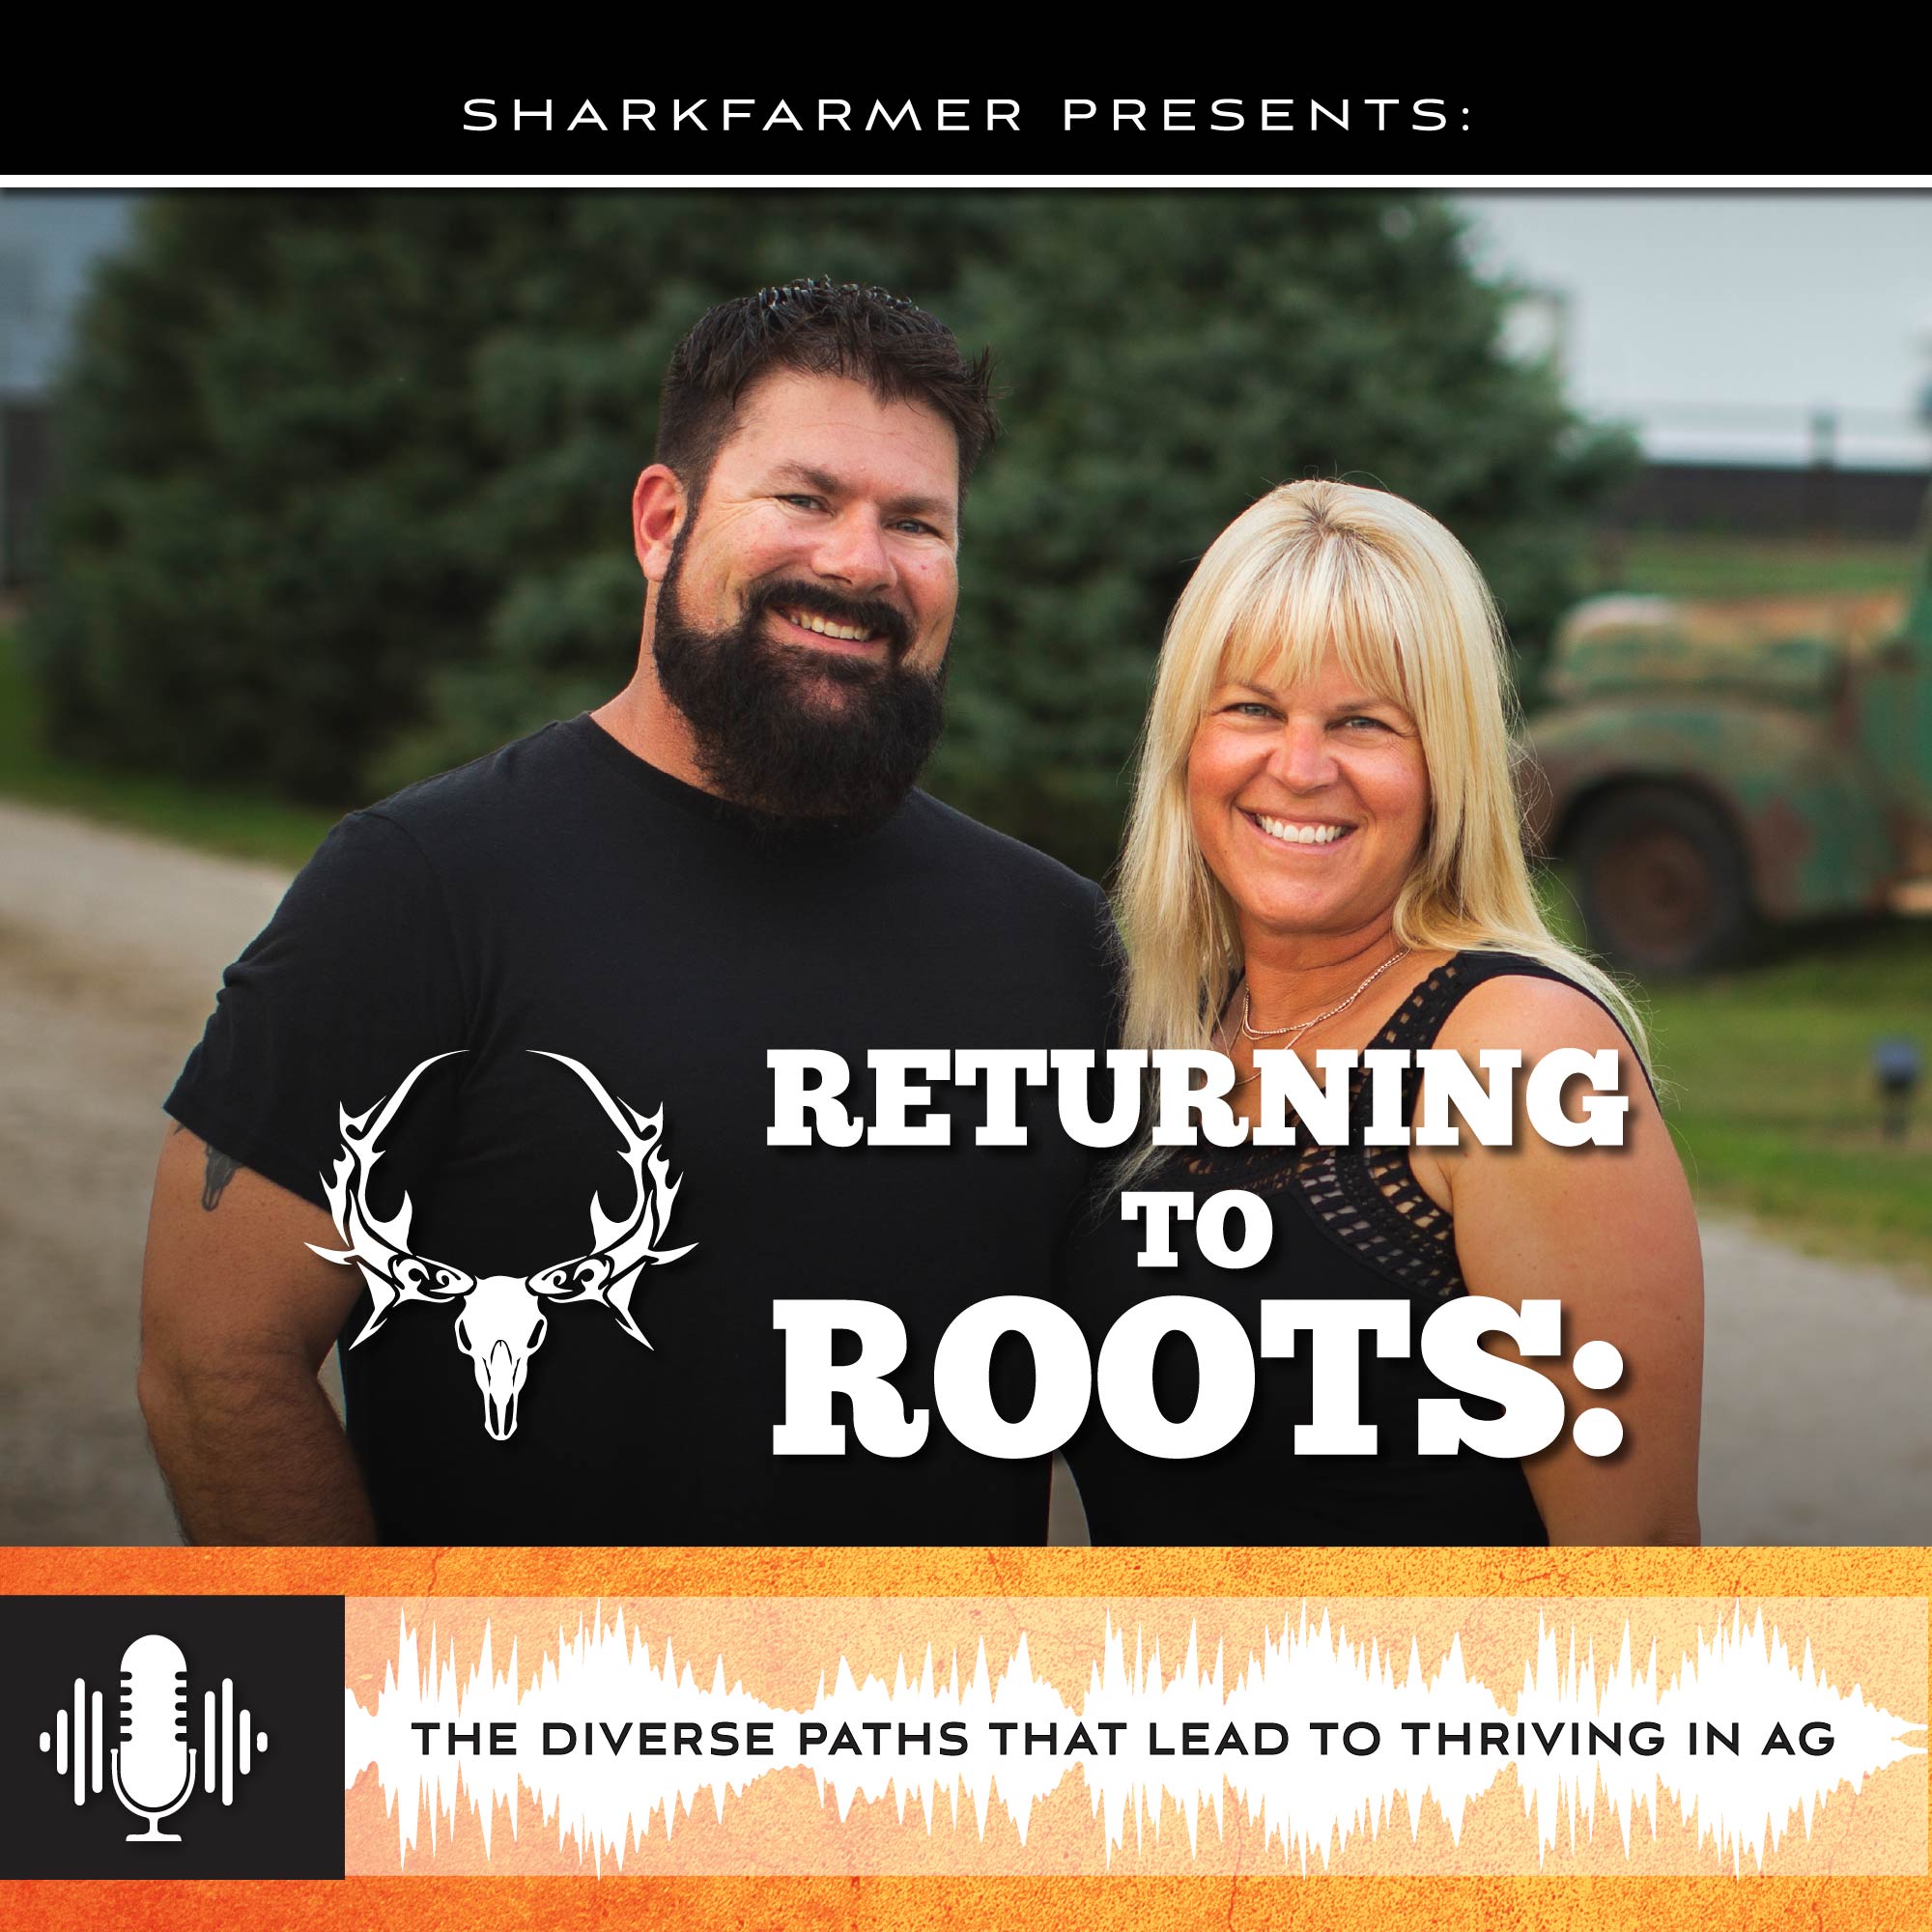 Sharkfarmer: Returning to Roots: The Diverse Paths that Lead to Thriving in Ag